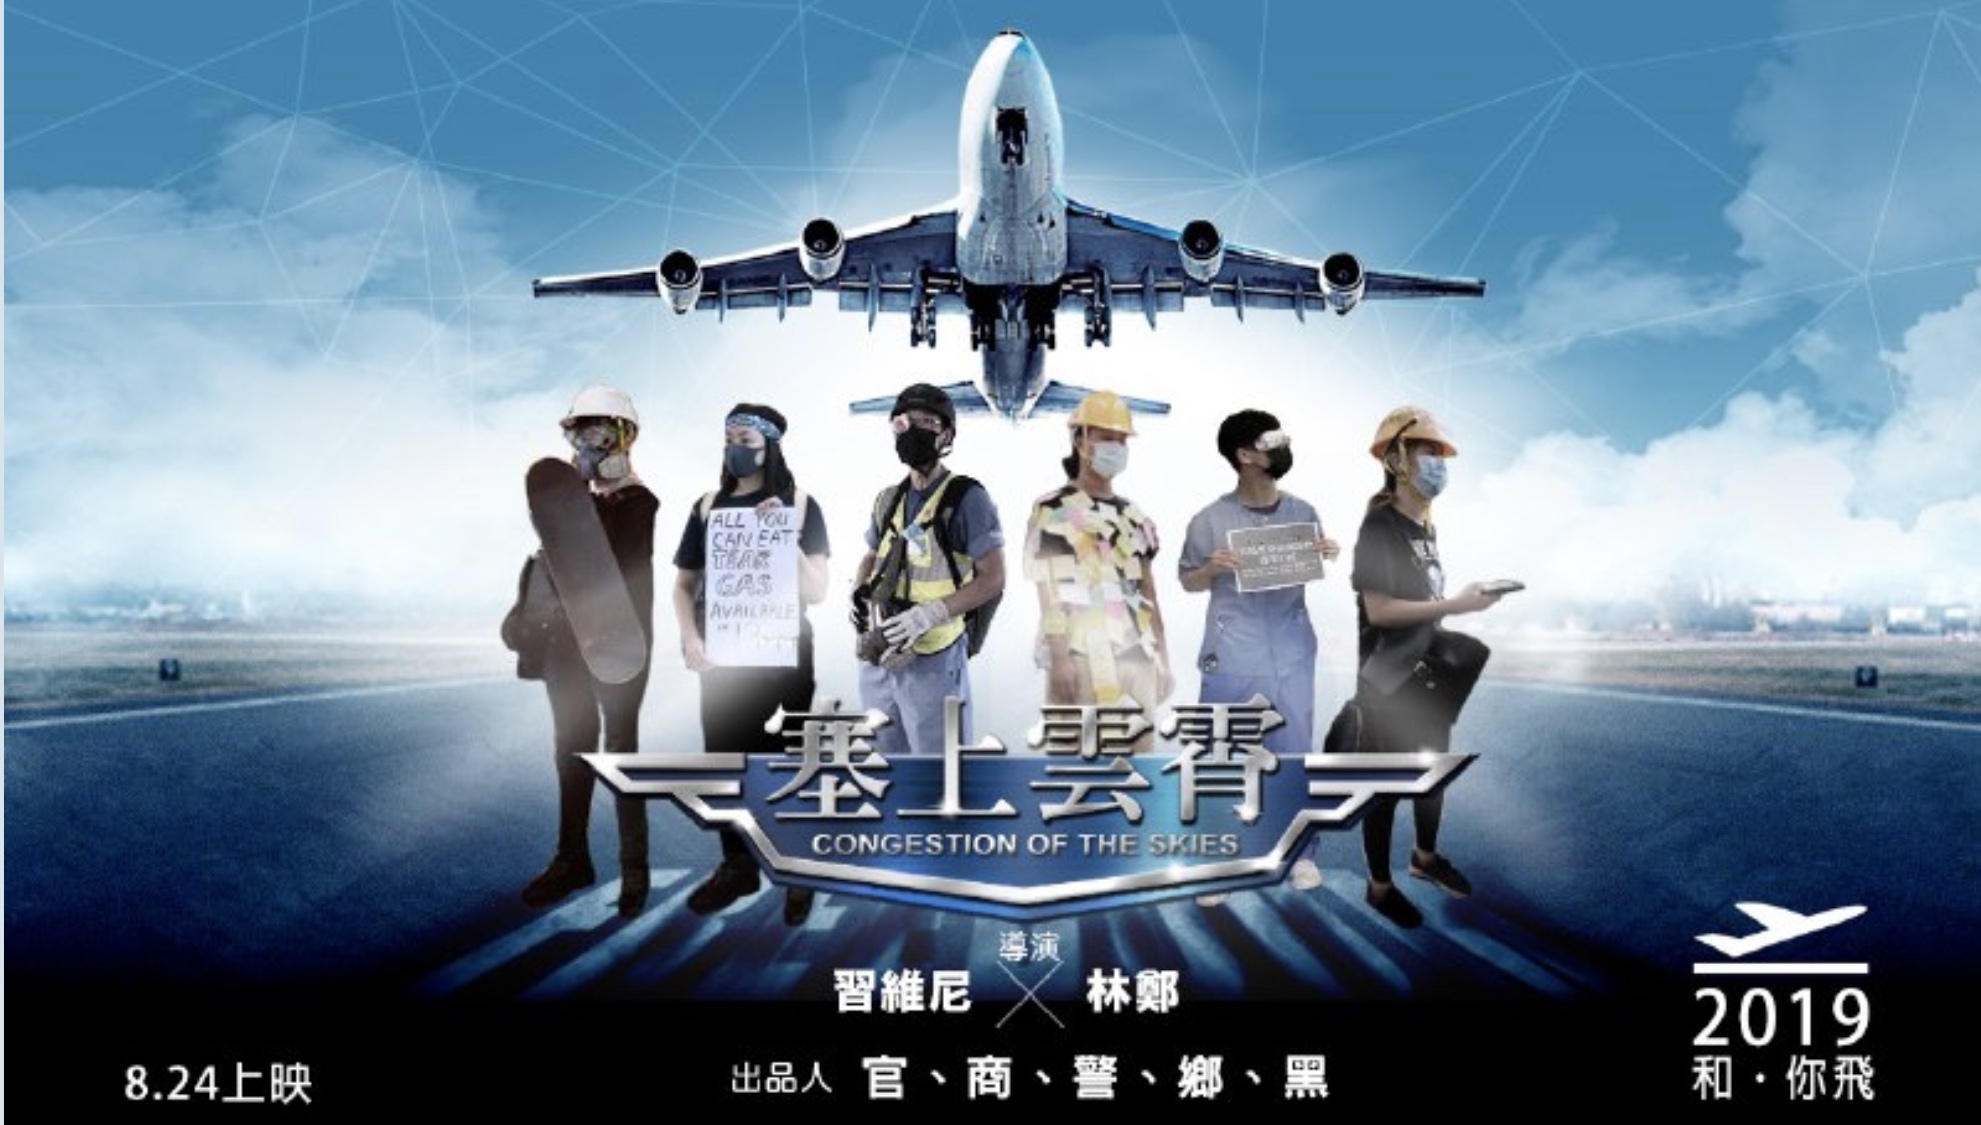 A flier in the style of movie poster calls on protesters to paralyze transportation to Hong Kong International Airport tomorrow. Under the title “Congestion of the Skies,” it reads “Directed by Carrie Lam and Xi Jinping.” Photo via Telegram.